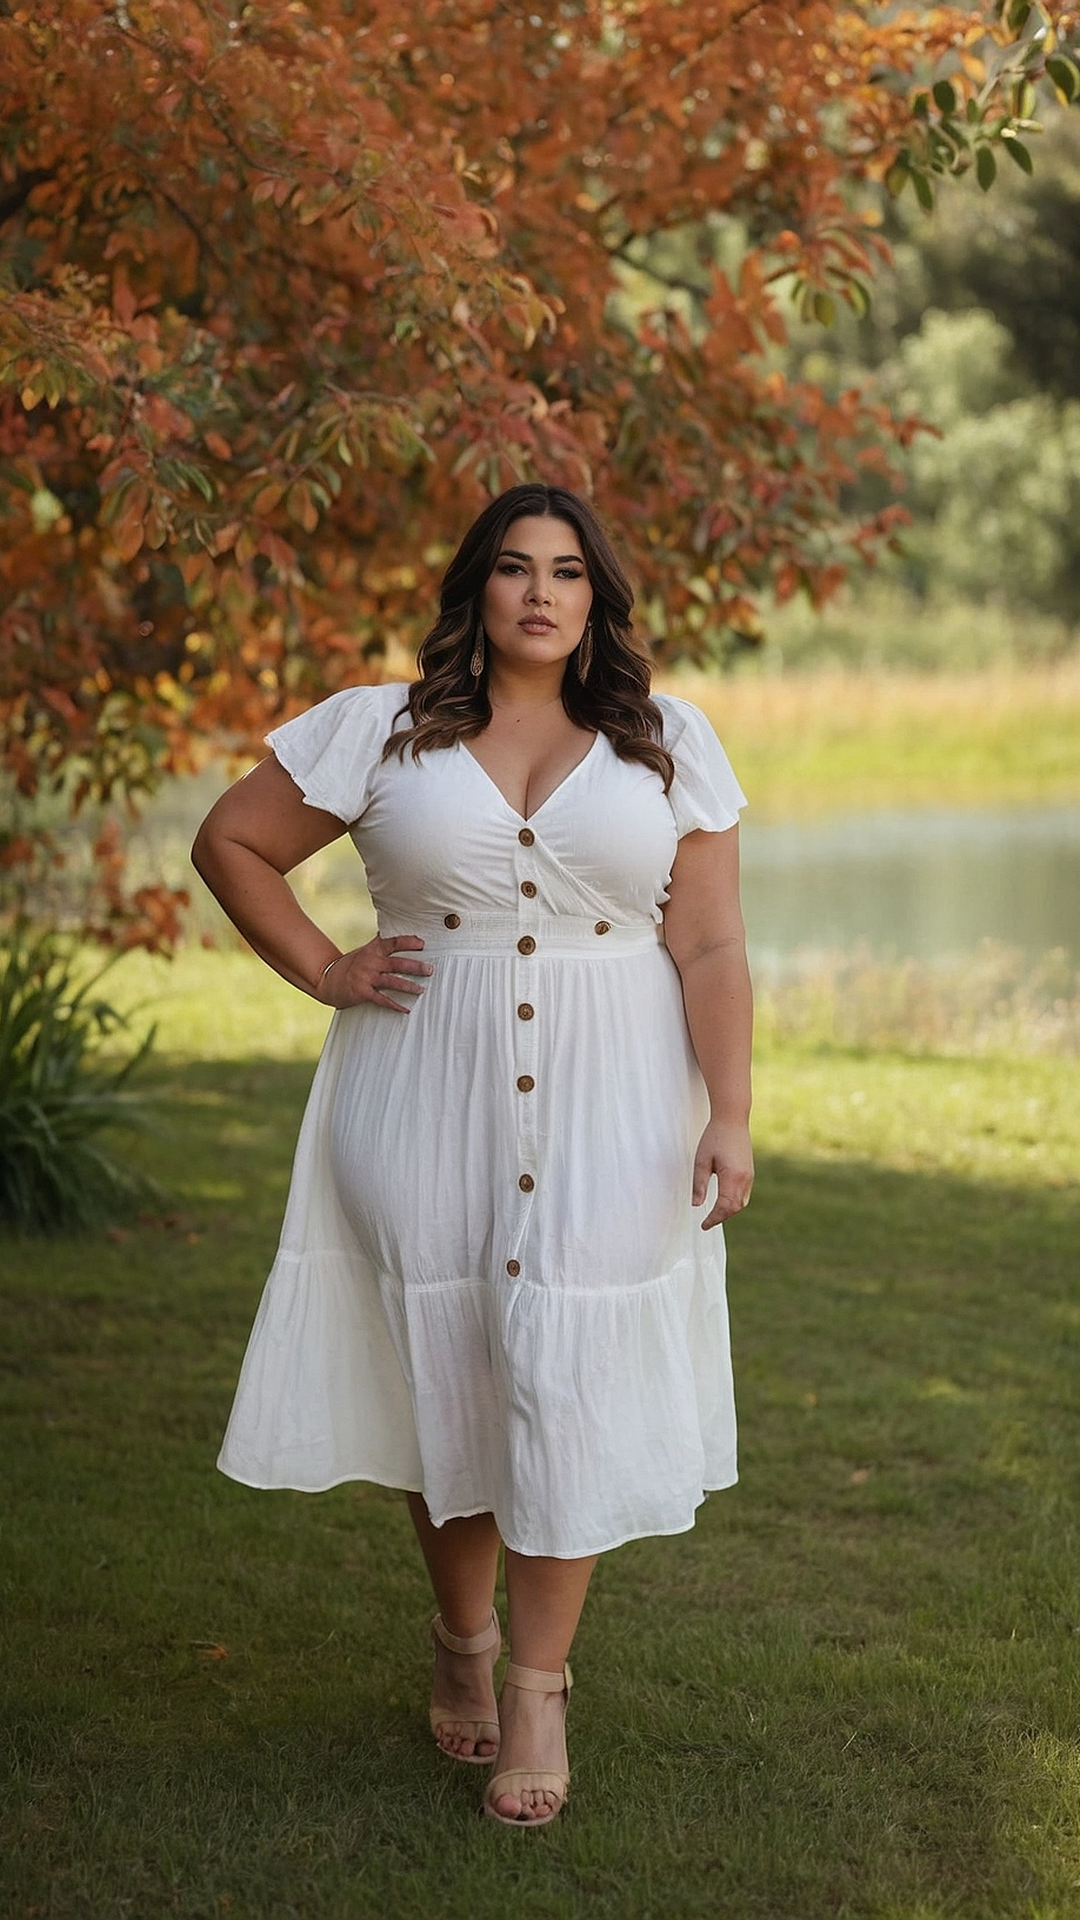 Chic Plus Size Outfits Ideal for Hot Summer Days